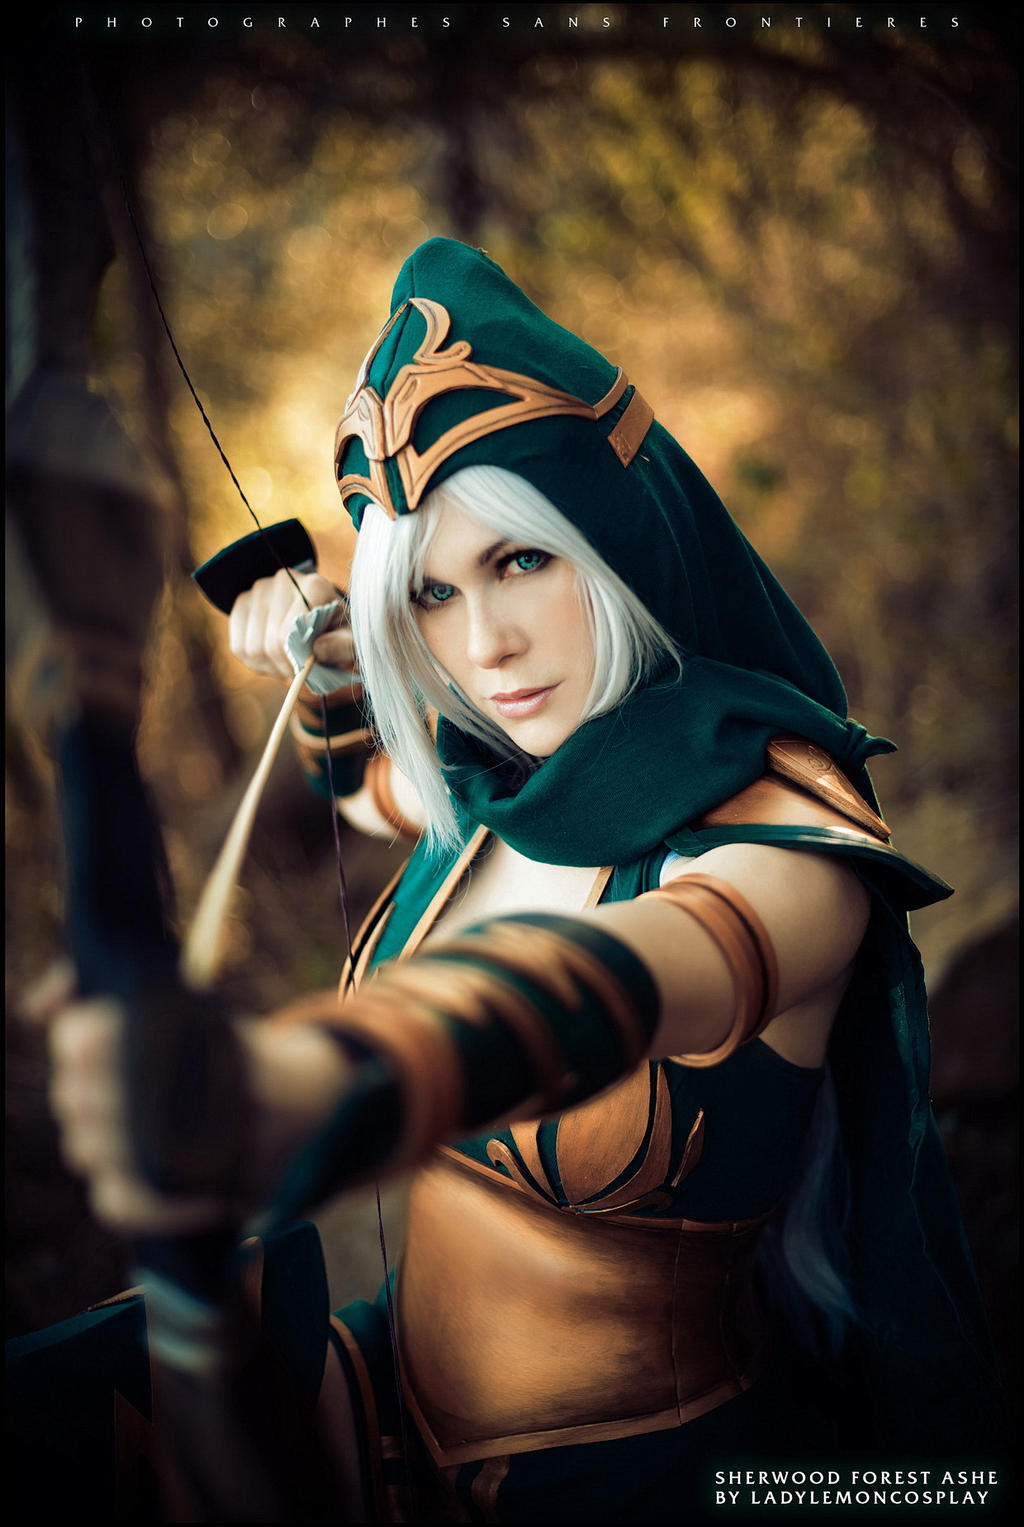 No one escapes my aim - Ashe - League of Legends